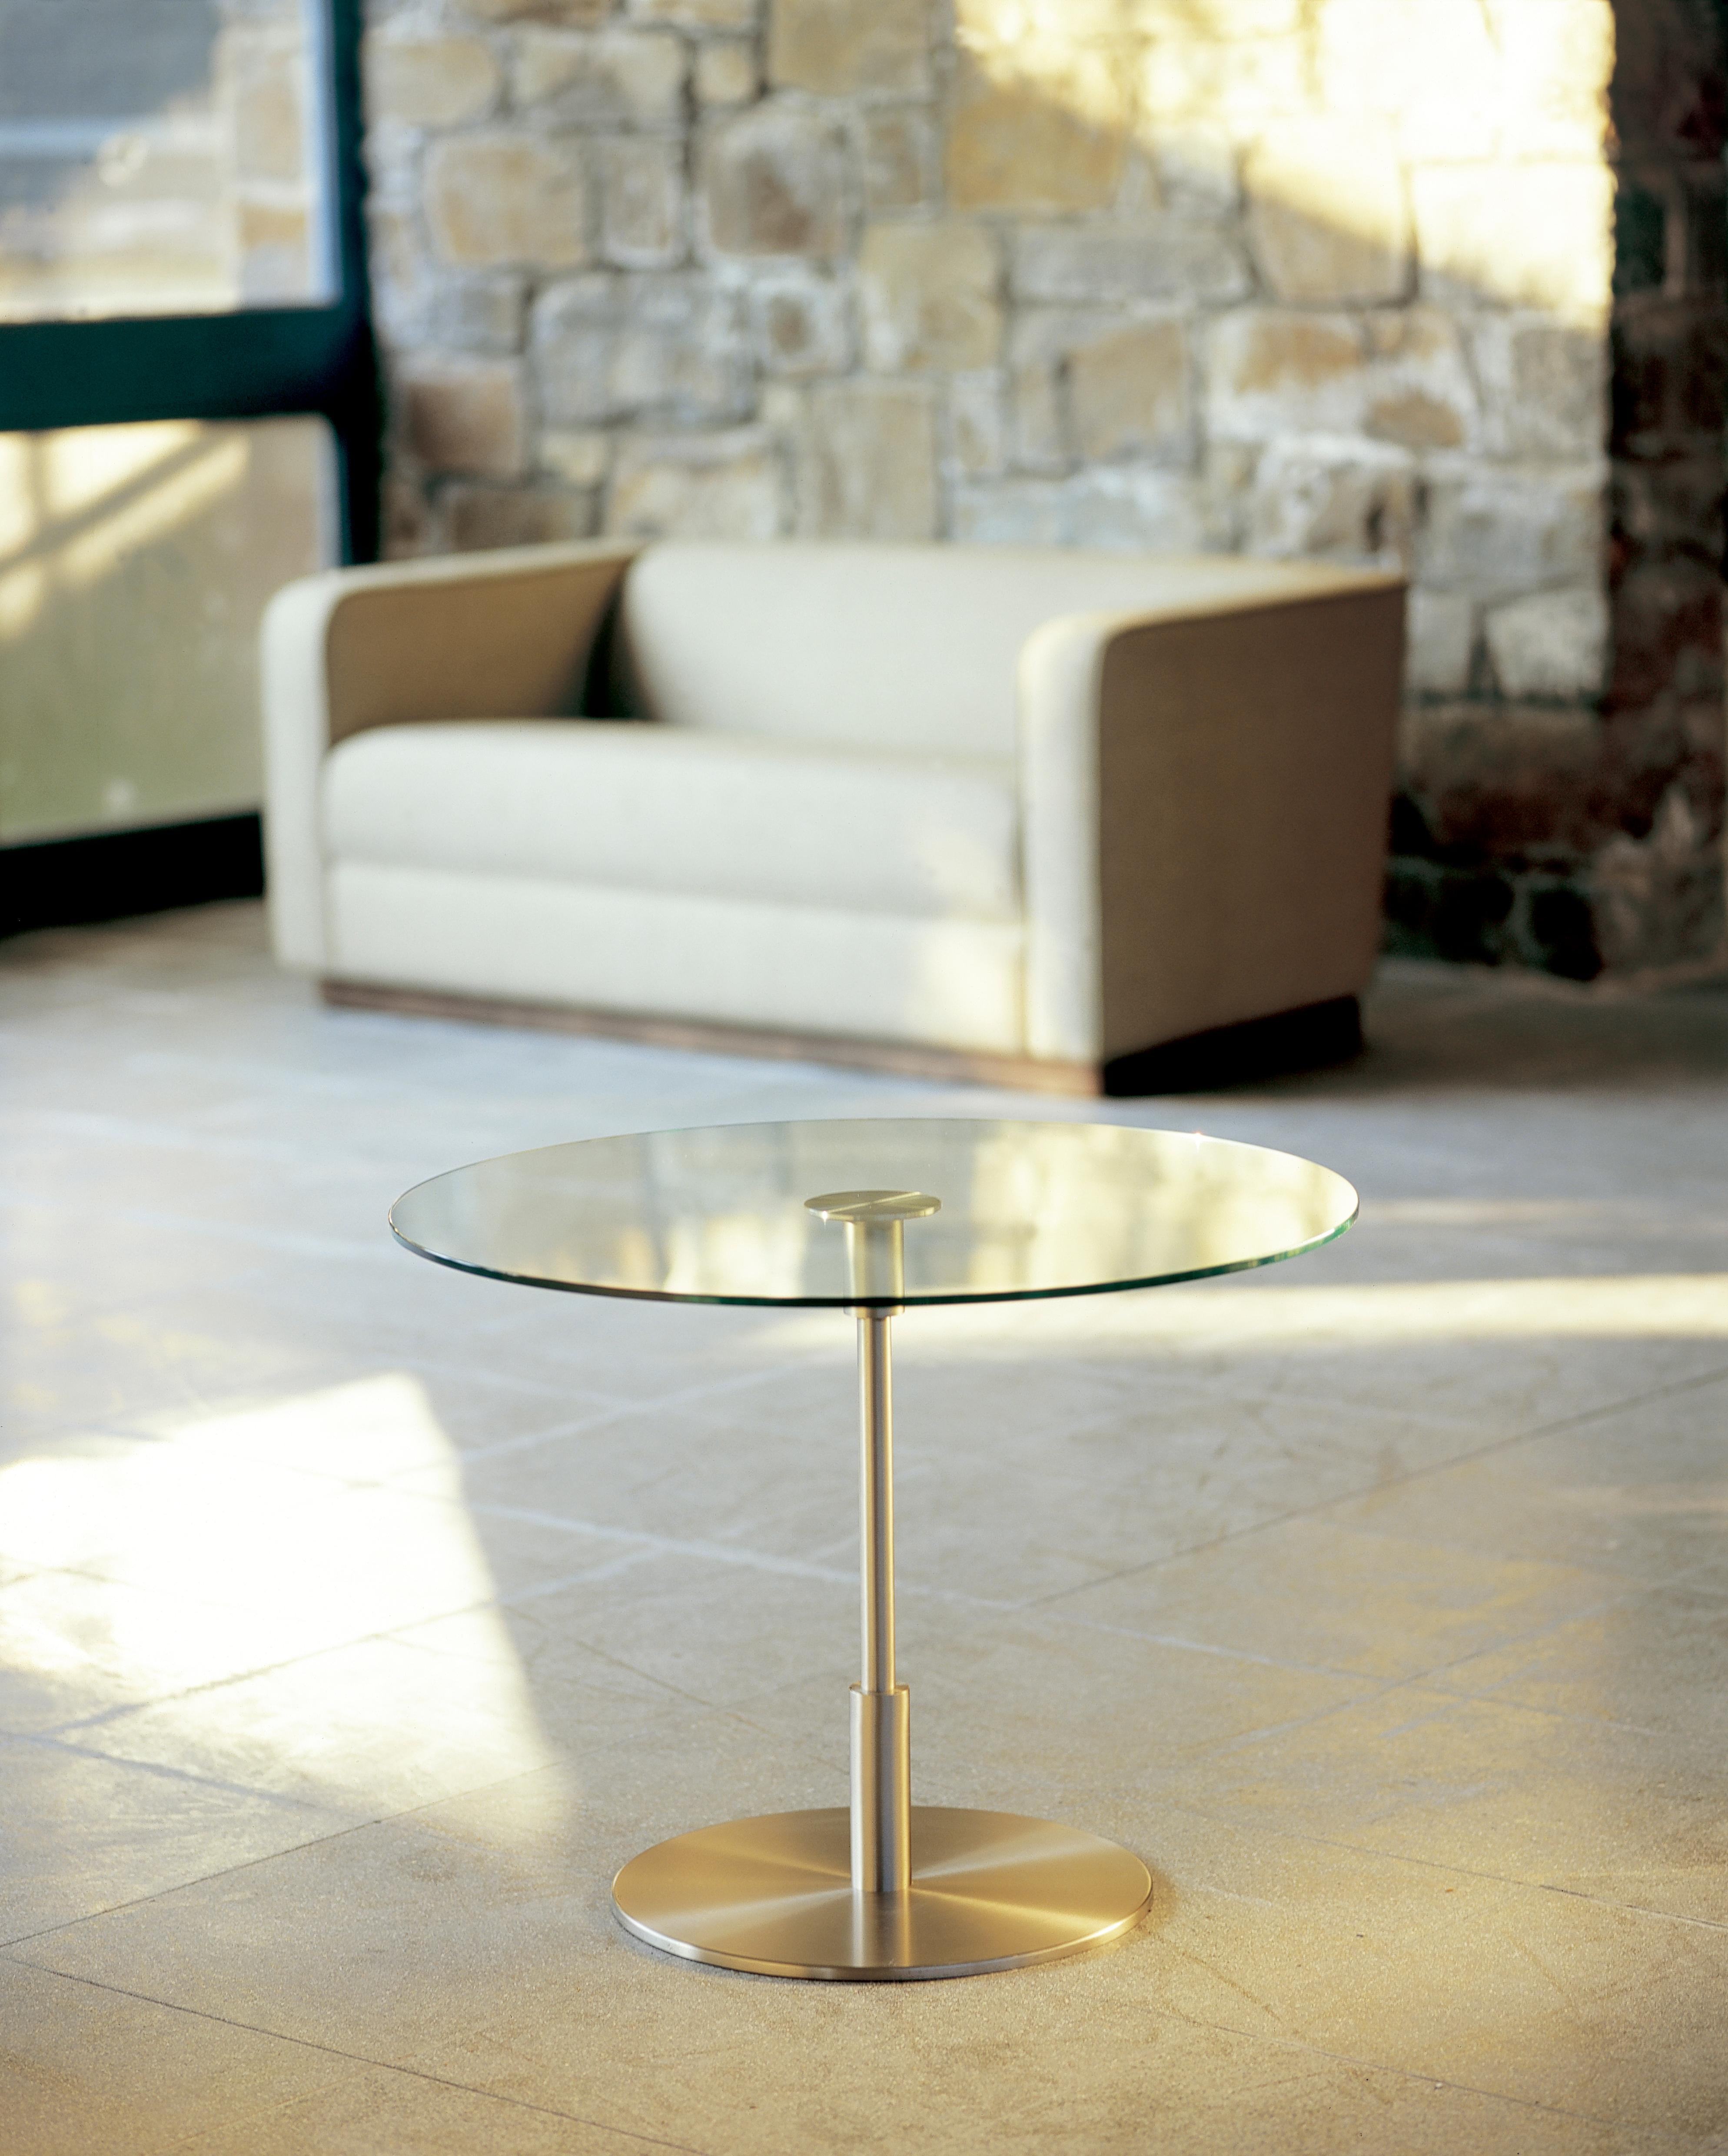 Diana Alta side table by Federico Correa, Alfonso Milá, Miguel Milá
Dimensions: D 58 x H 62 cm
Materials: Metal, tempered glass.
Available in 2 sizes: D58 x H62, D70 x H52 cm.

The Diana table is the embodiment of eloquent timelessness. Its